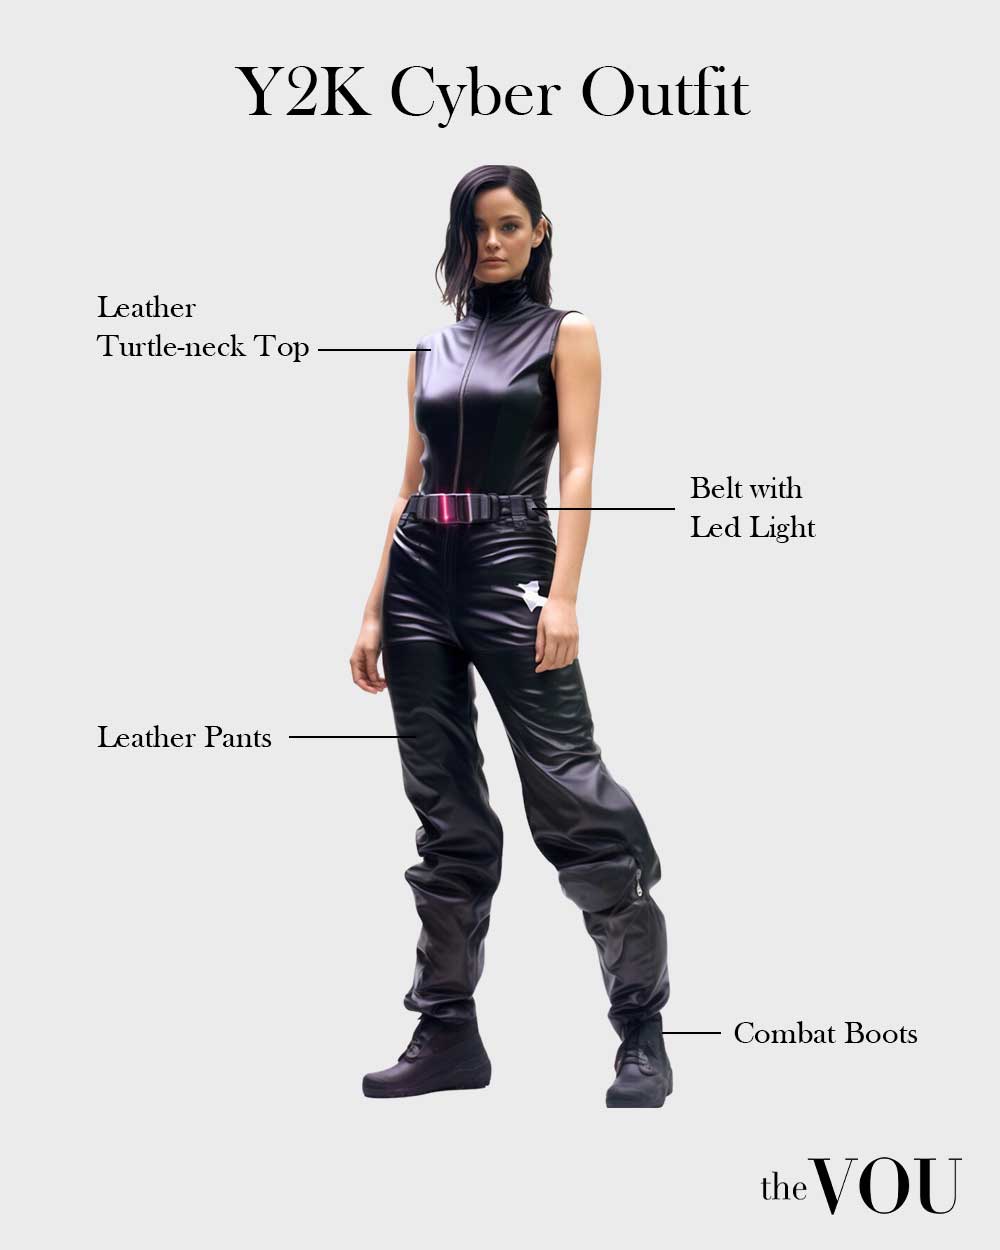 Y2K Cyber Style outfit for women